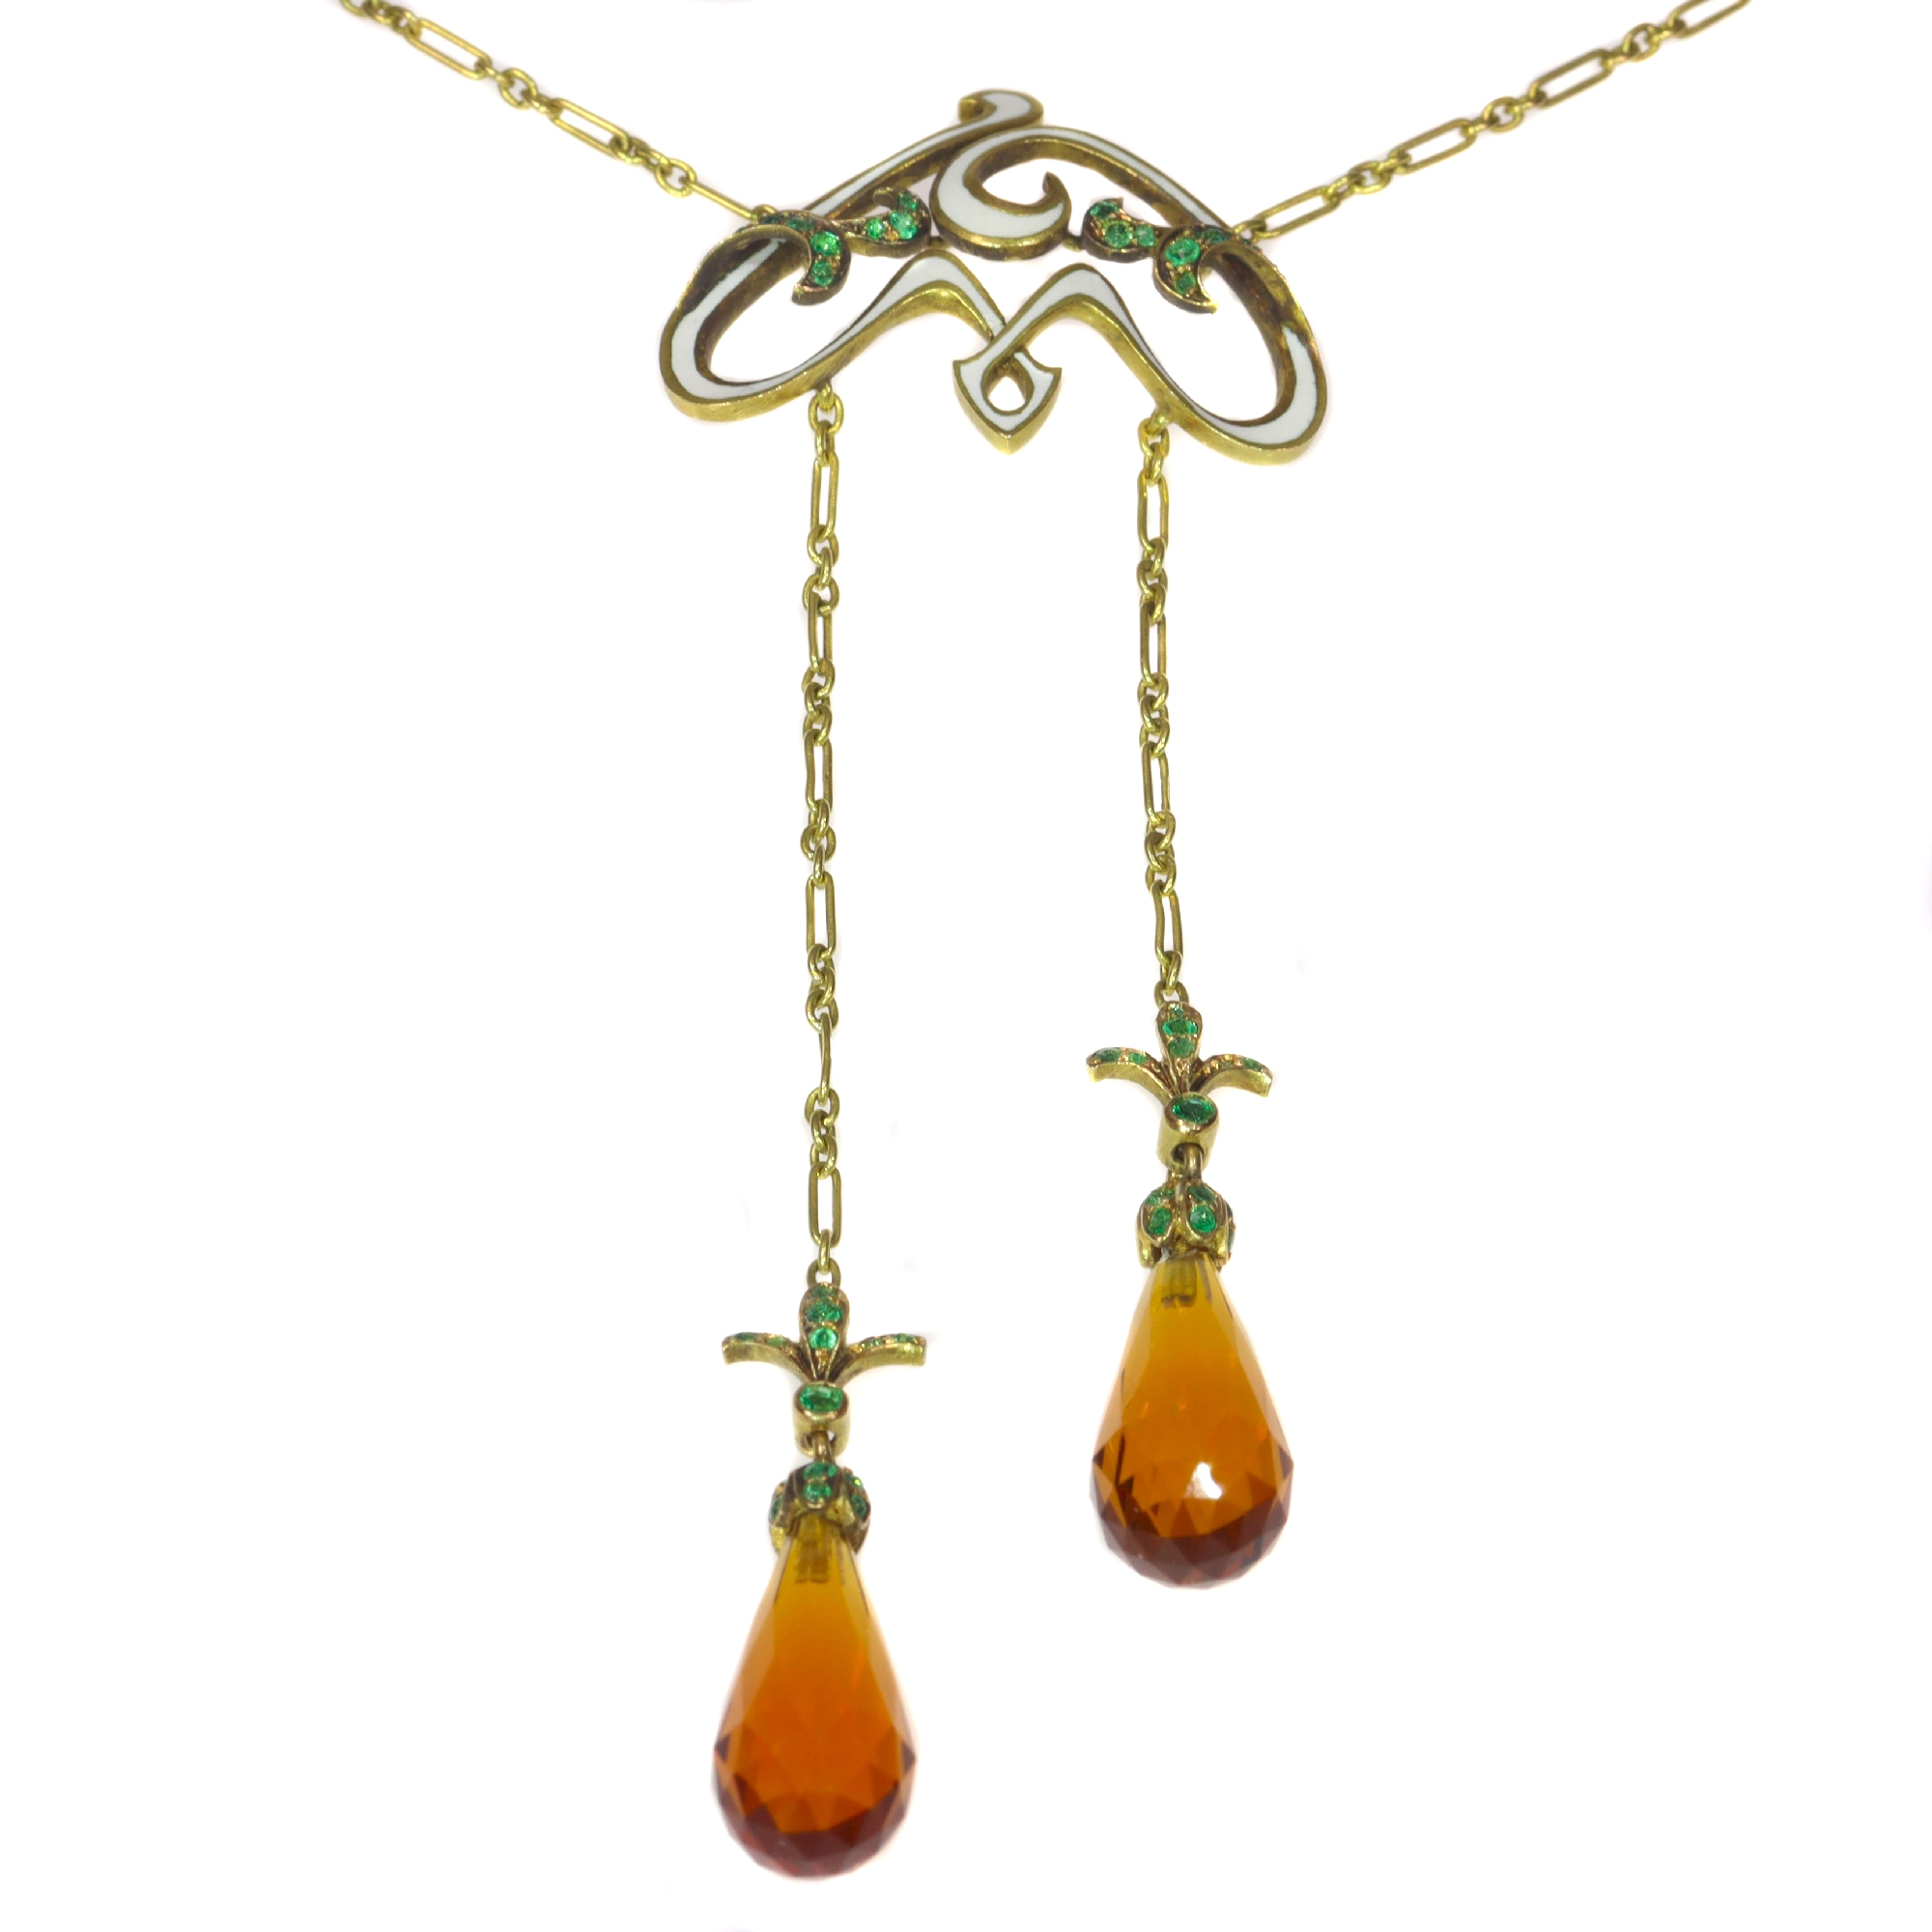 French Art Nouveau enameled necklace with emeralds and citrine briolettes